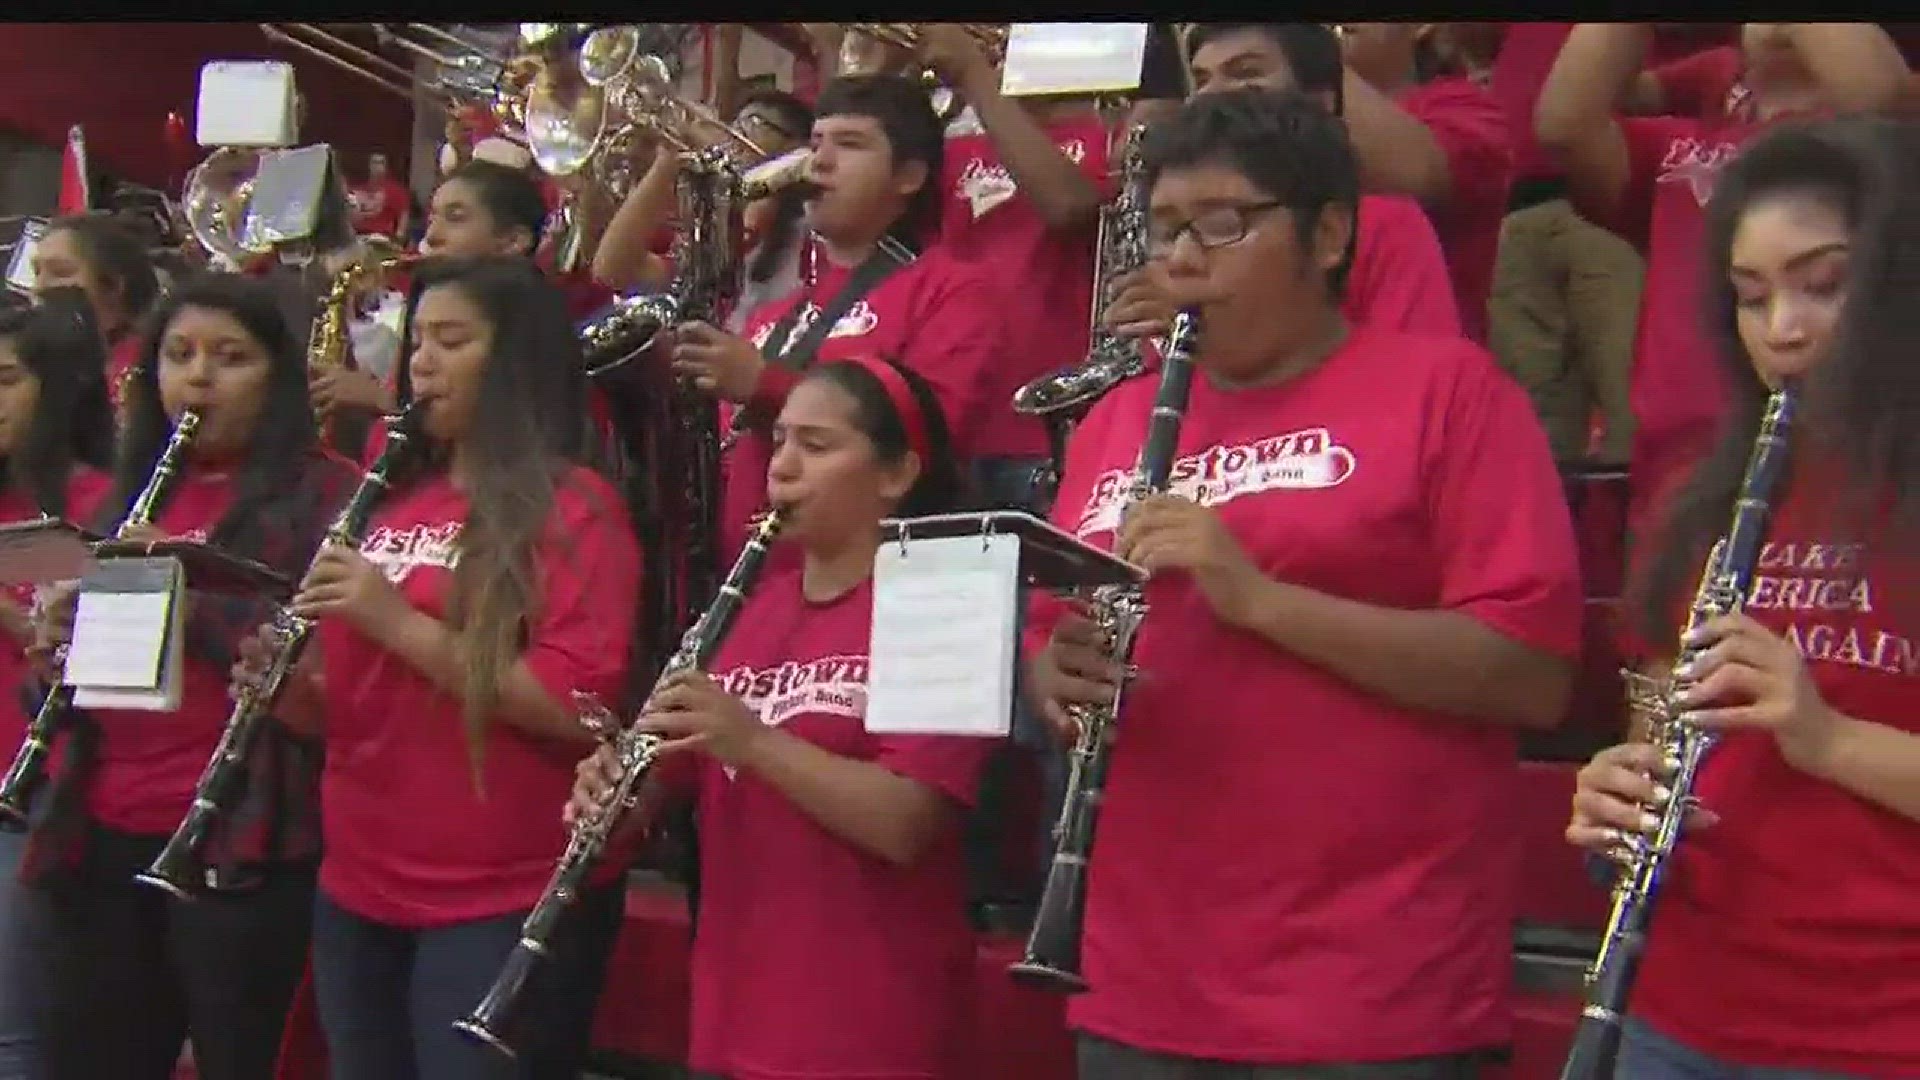 This week's Blitz Band of the Week goes to Robstown High School!